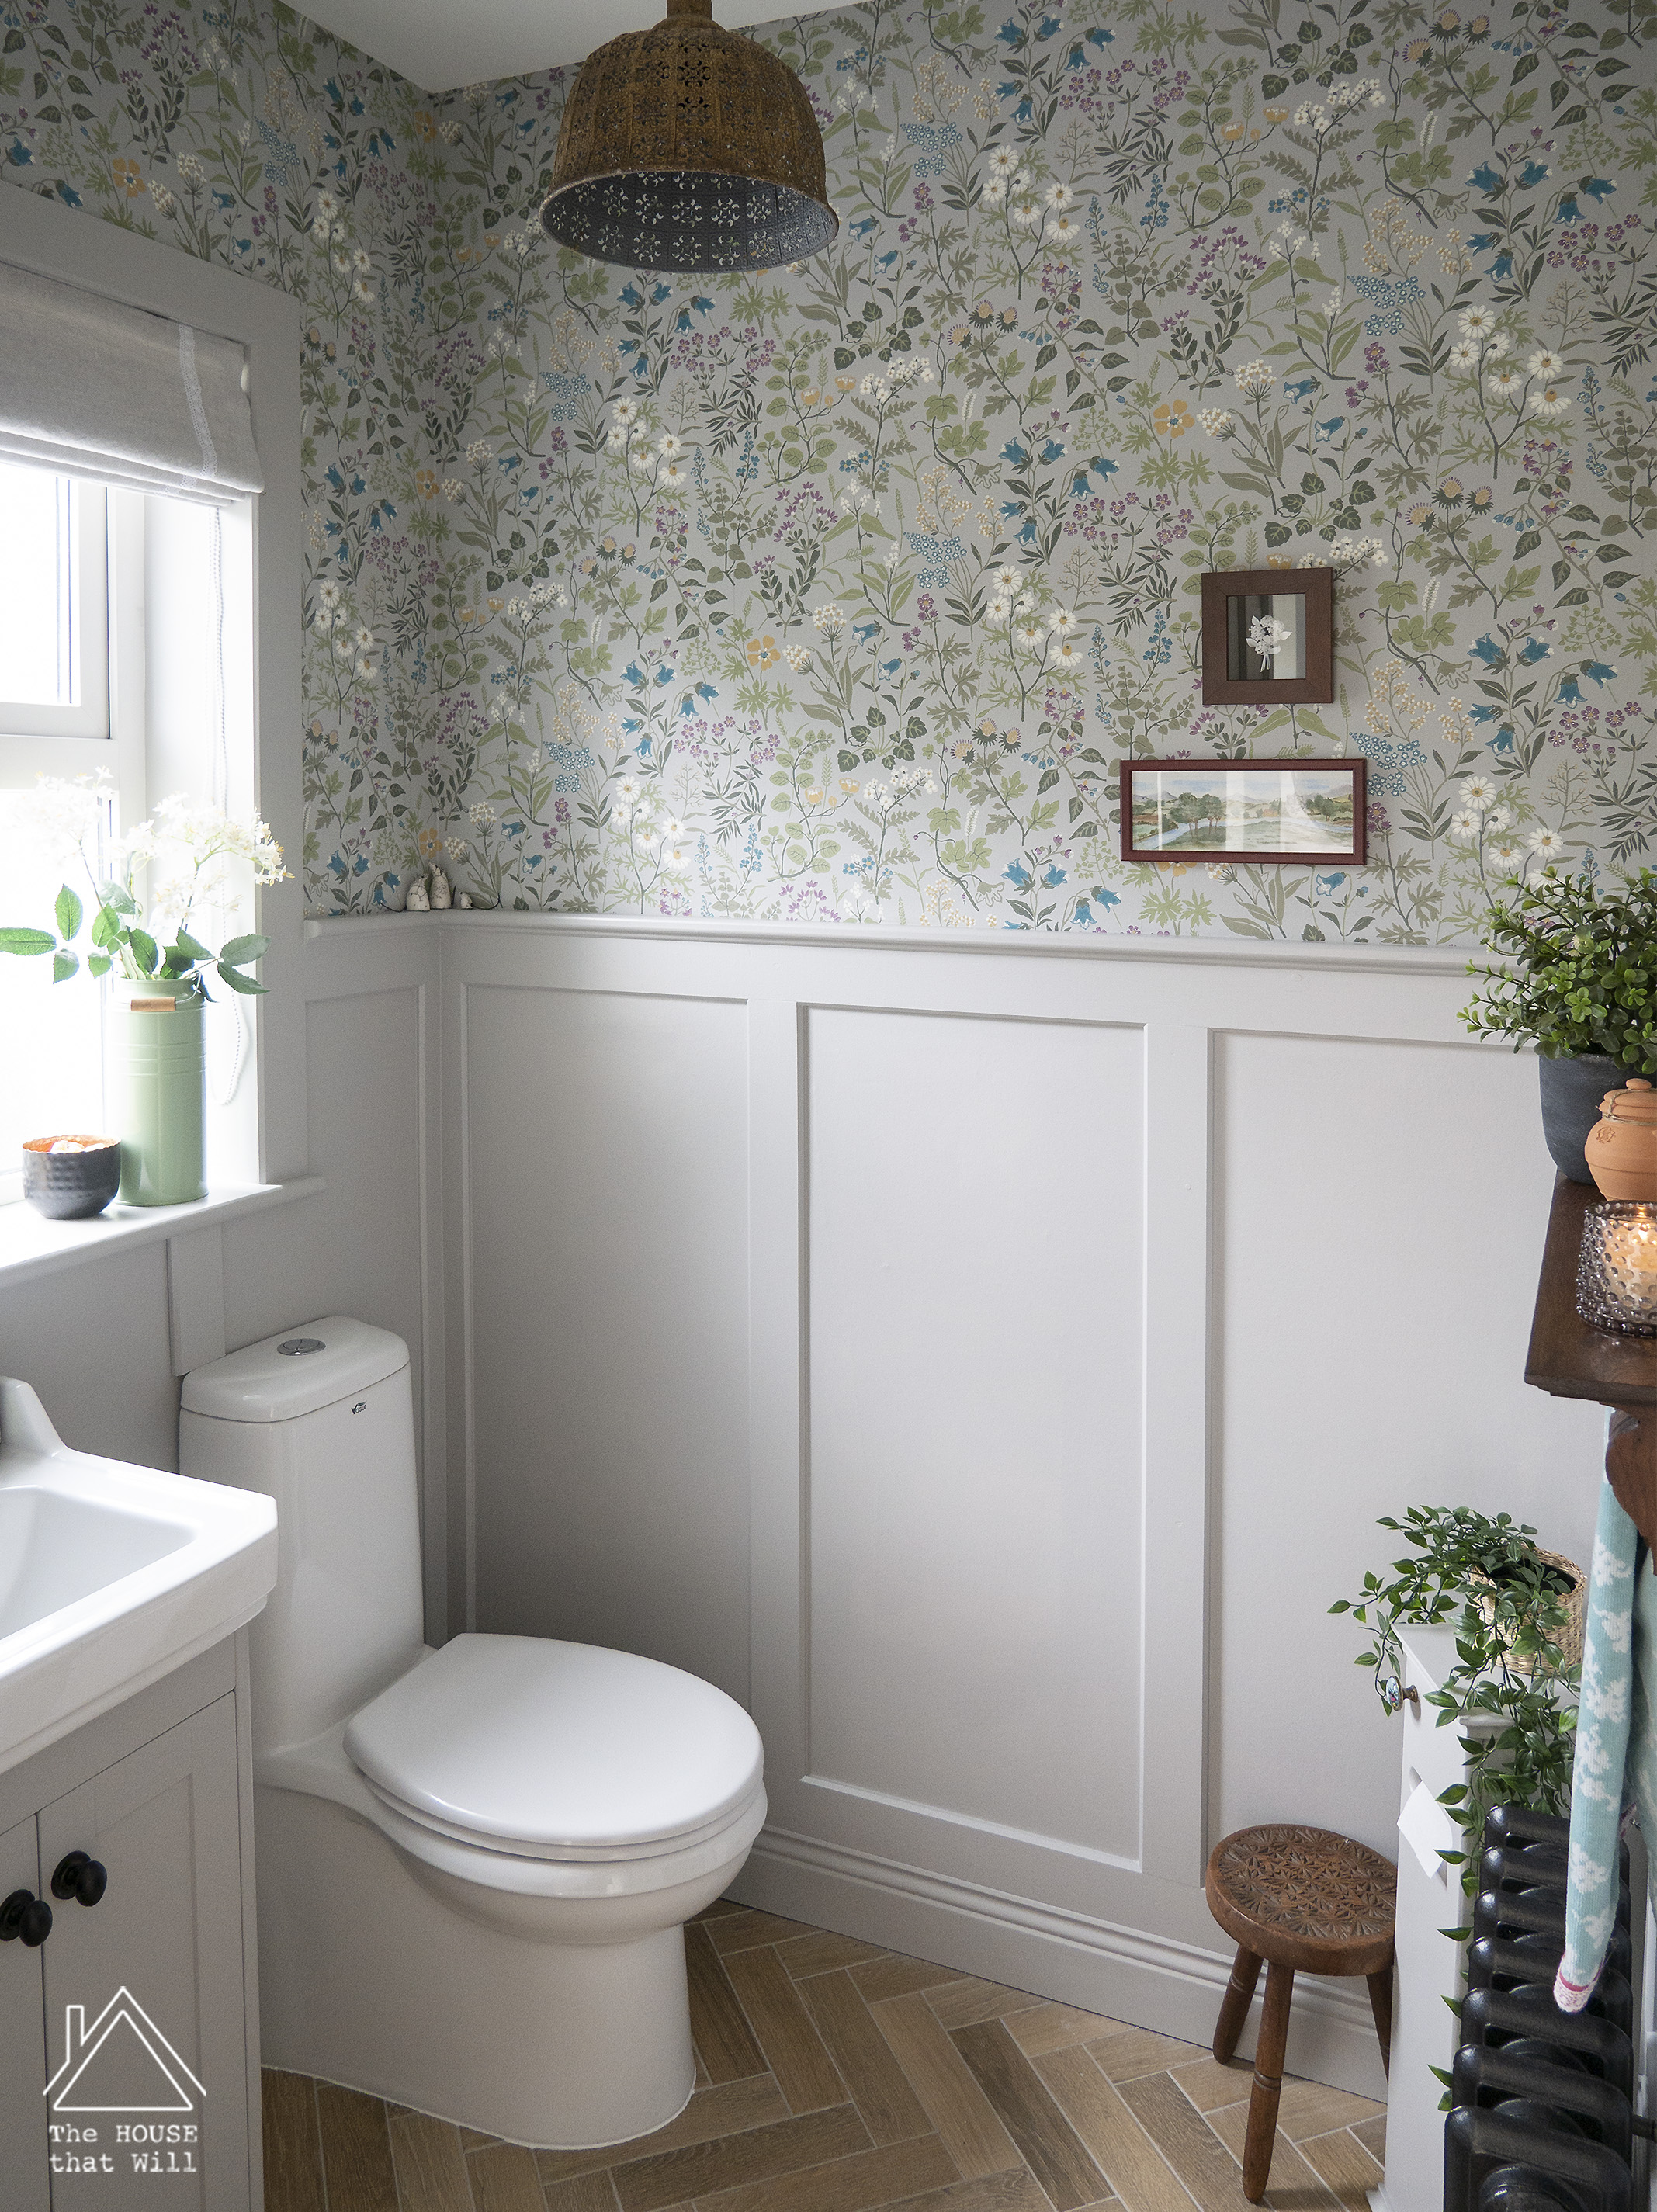 The House that Will | Downstairs Loo Powder Room Half Bath Room Reveal (One Room Challenge)